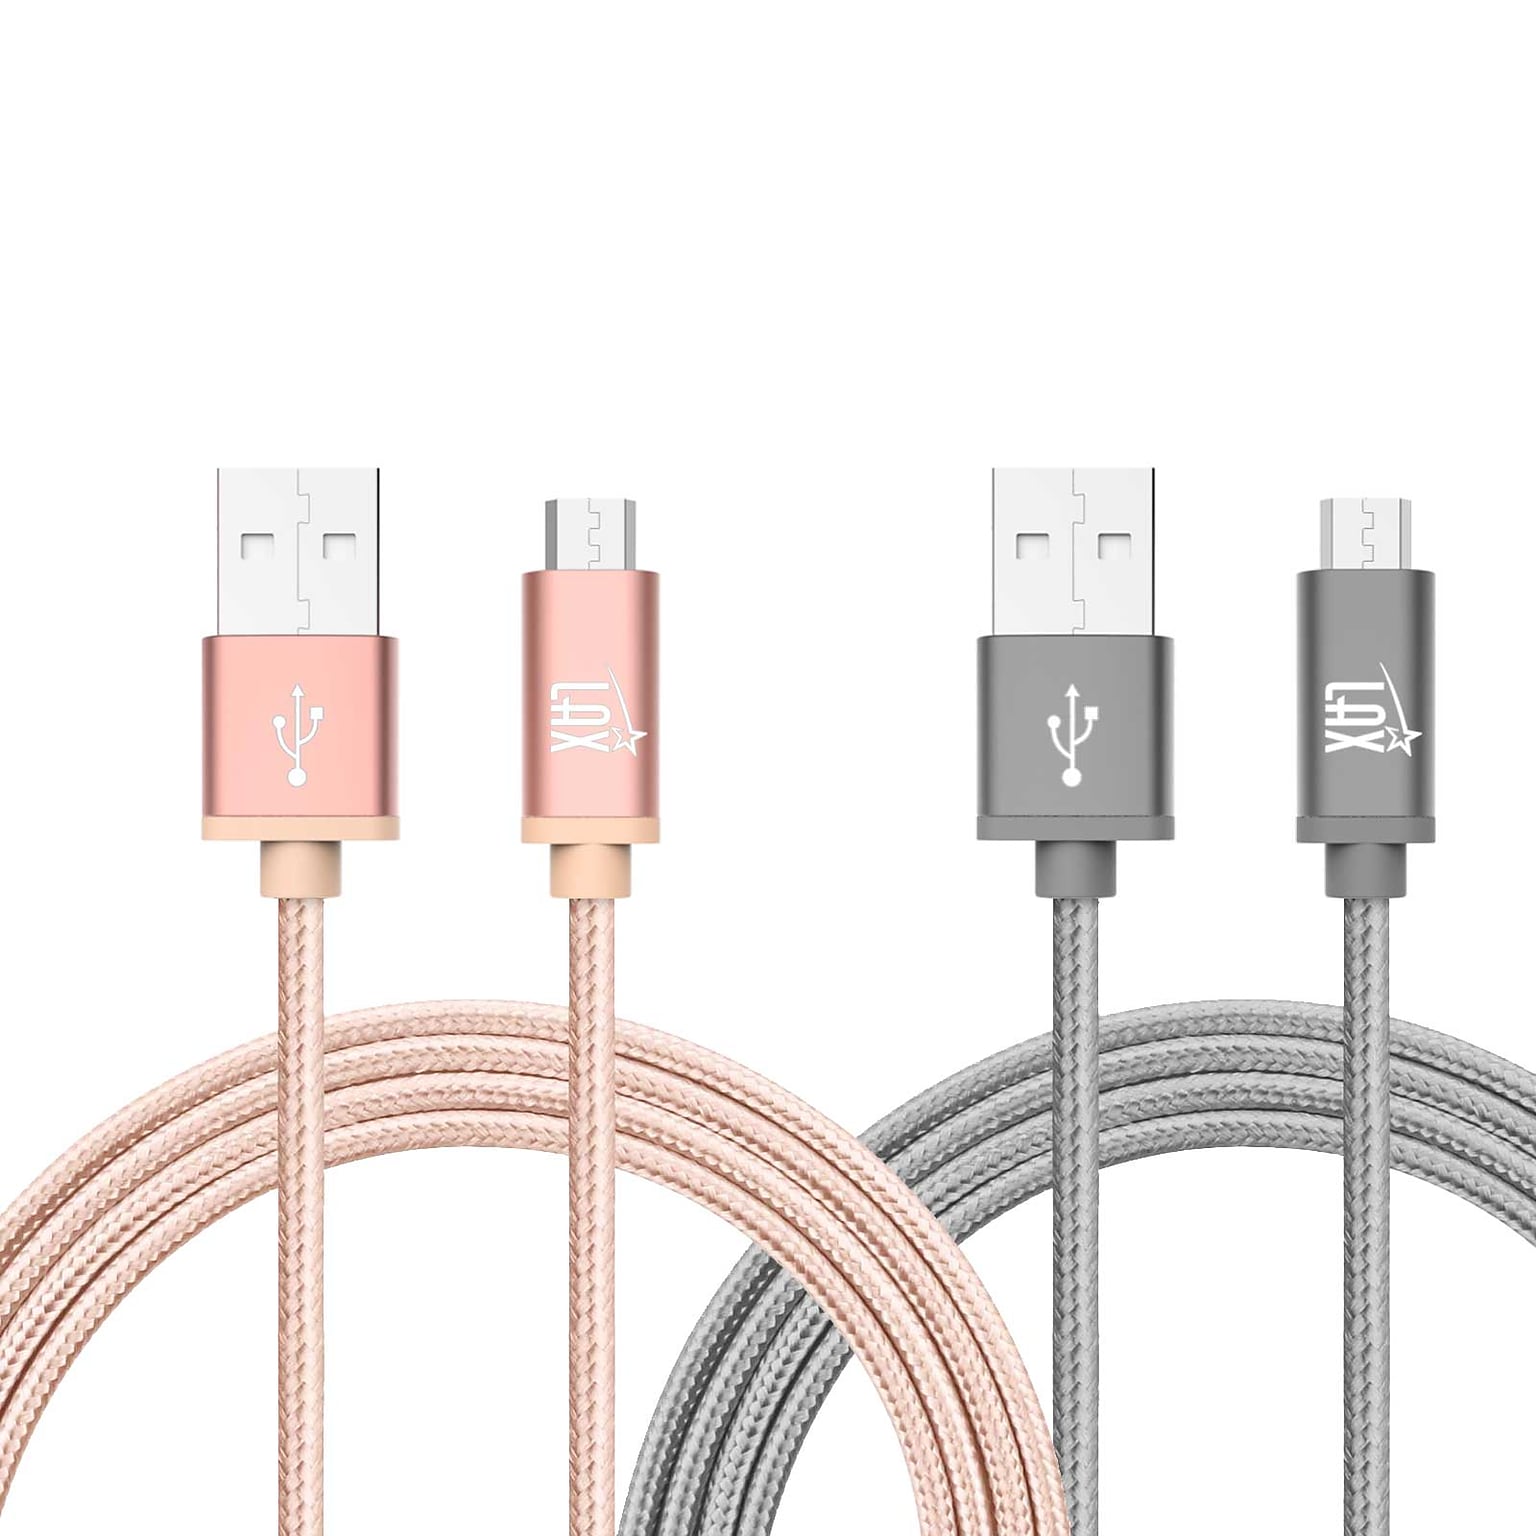 Durable Braided Micro USB Cables for Android Smartphones, Samsung, LG (10ft) - (Set of 2 - Gray + Rose Gold)